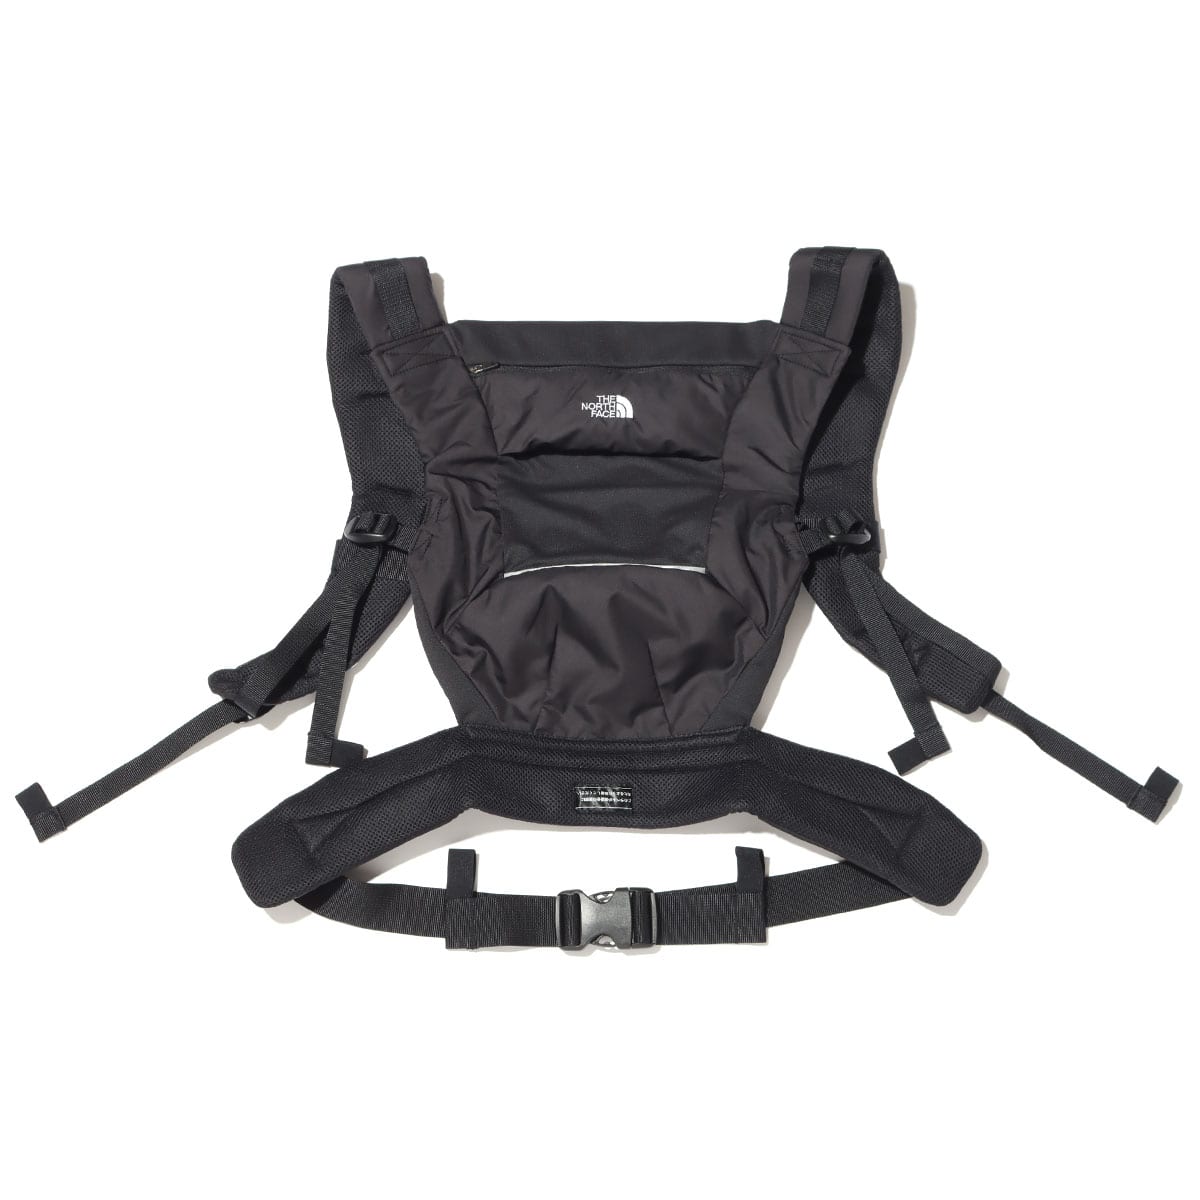 THE NORTH FACE BABY COMPACT CARRIER ブラック 22SS-I